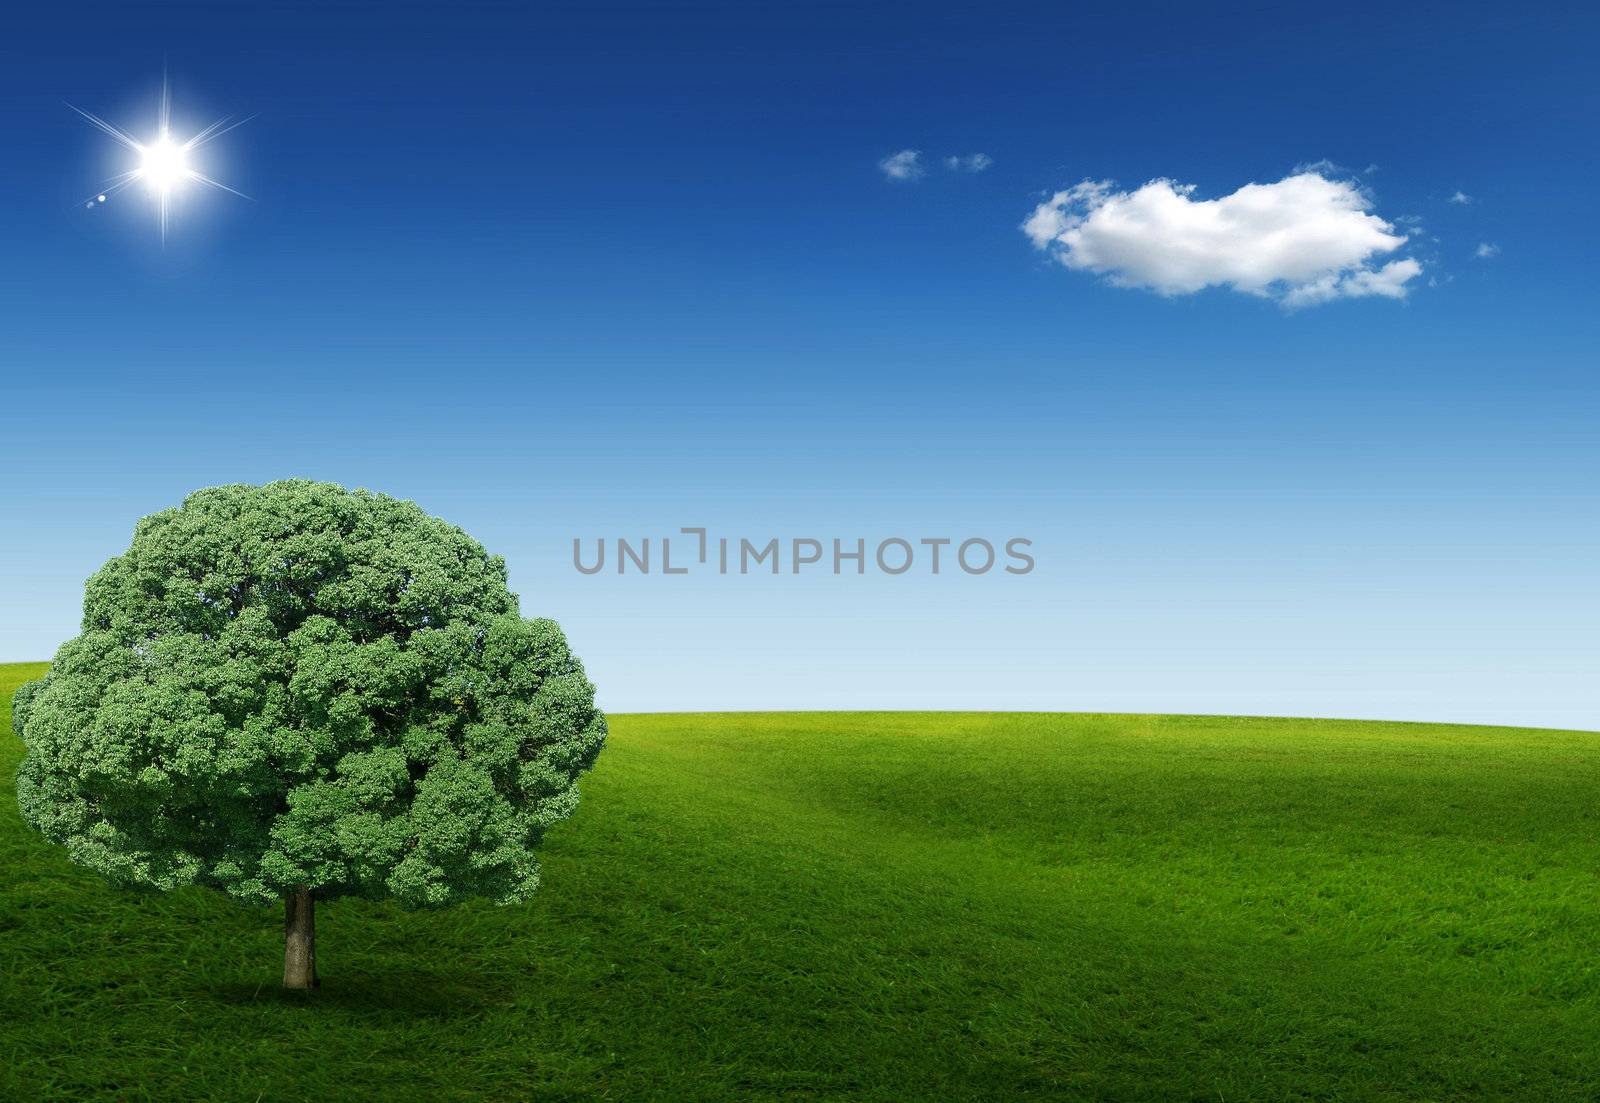 Nice picture with a tree in the field with blue sky